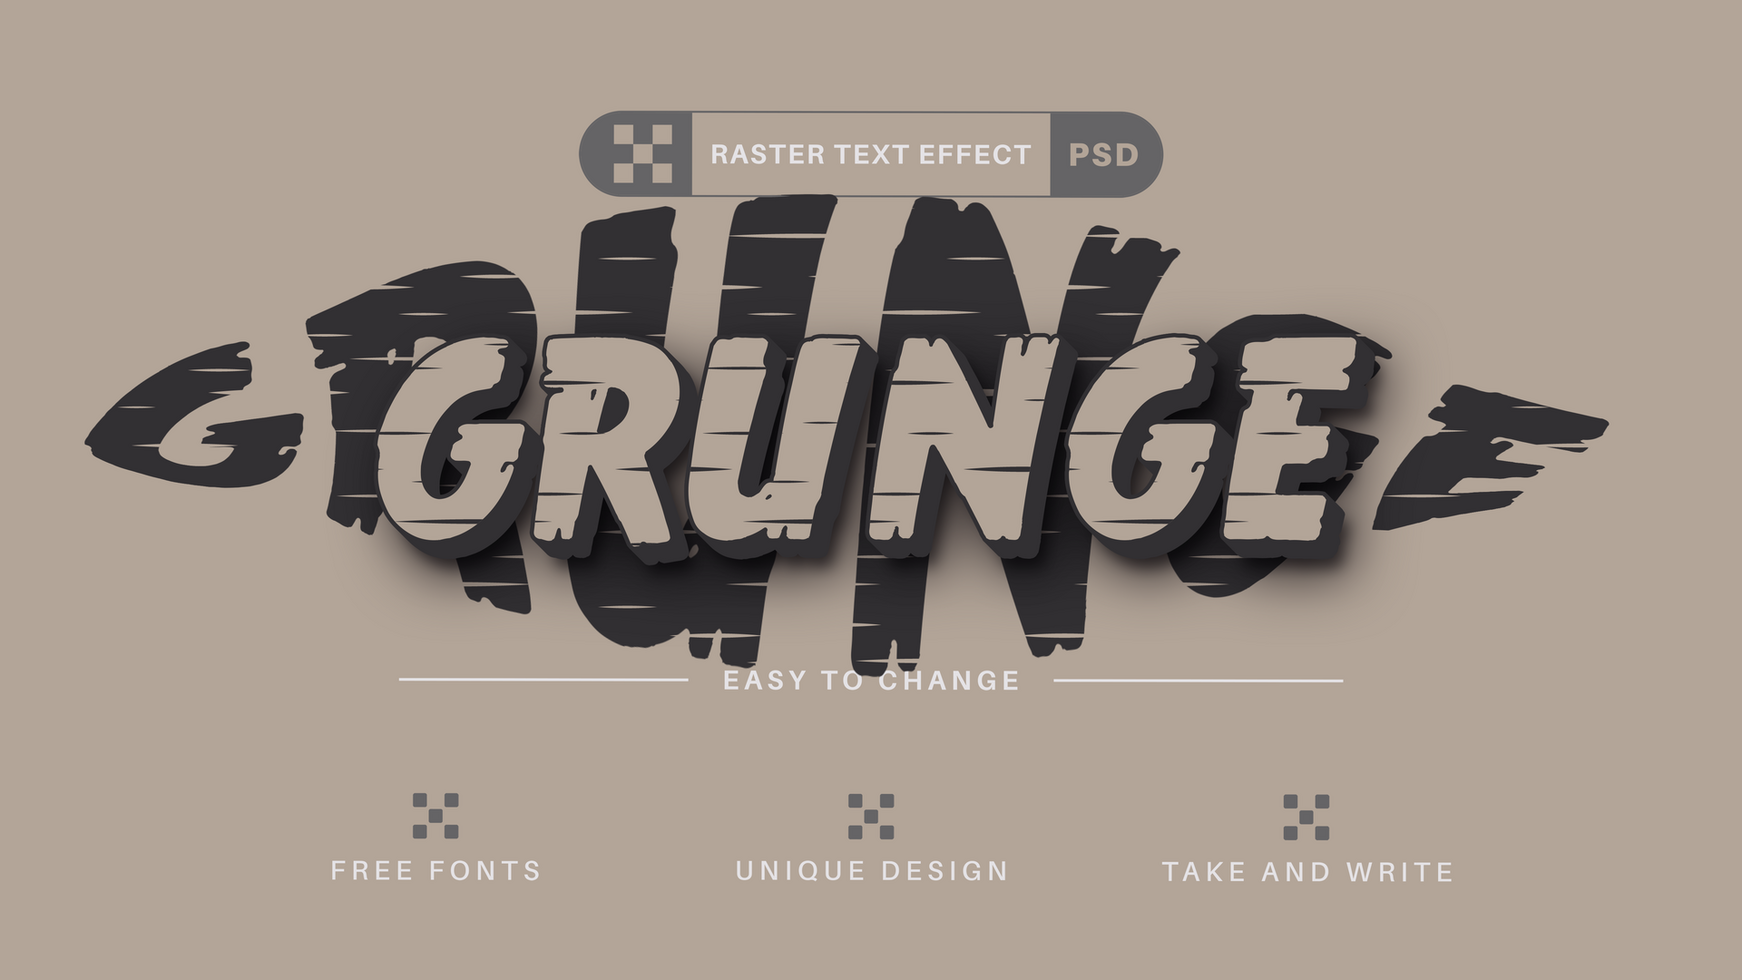 Grunge - Editable Text Effect, Font Style psd